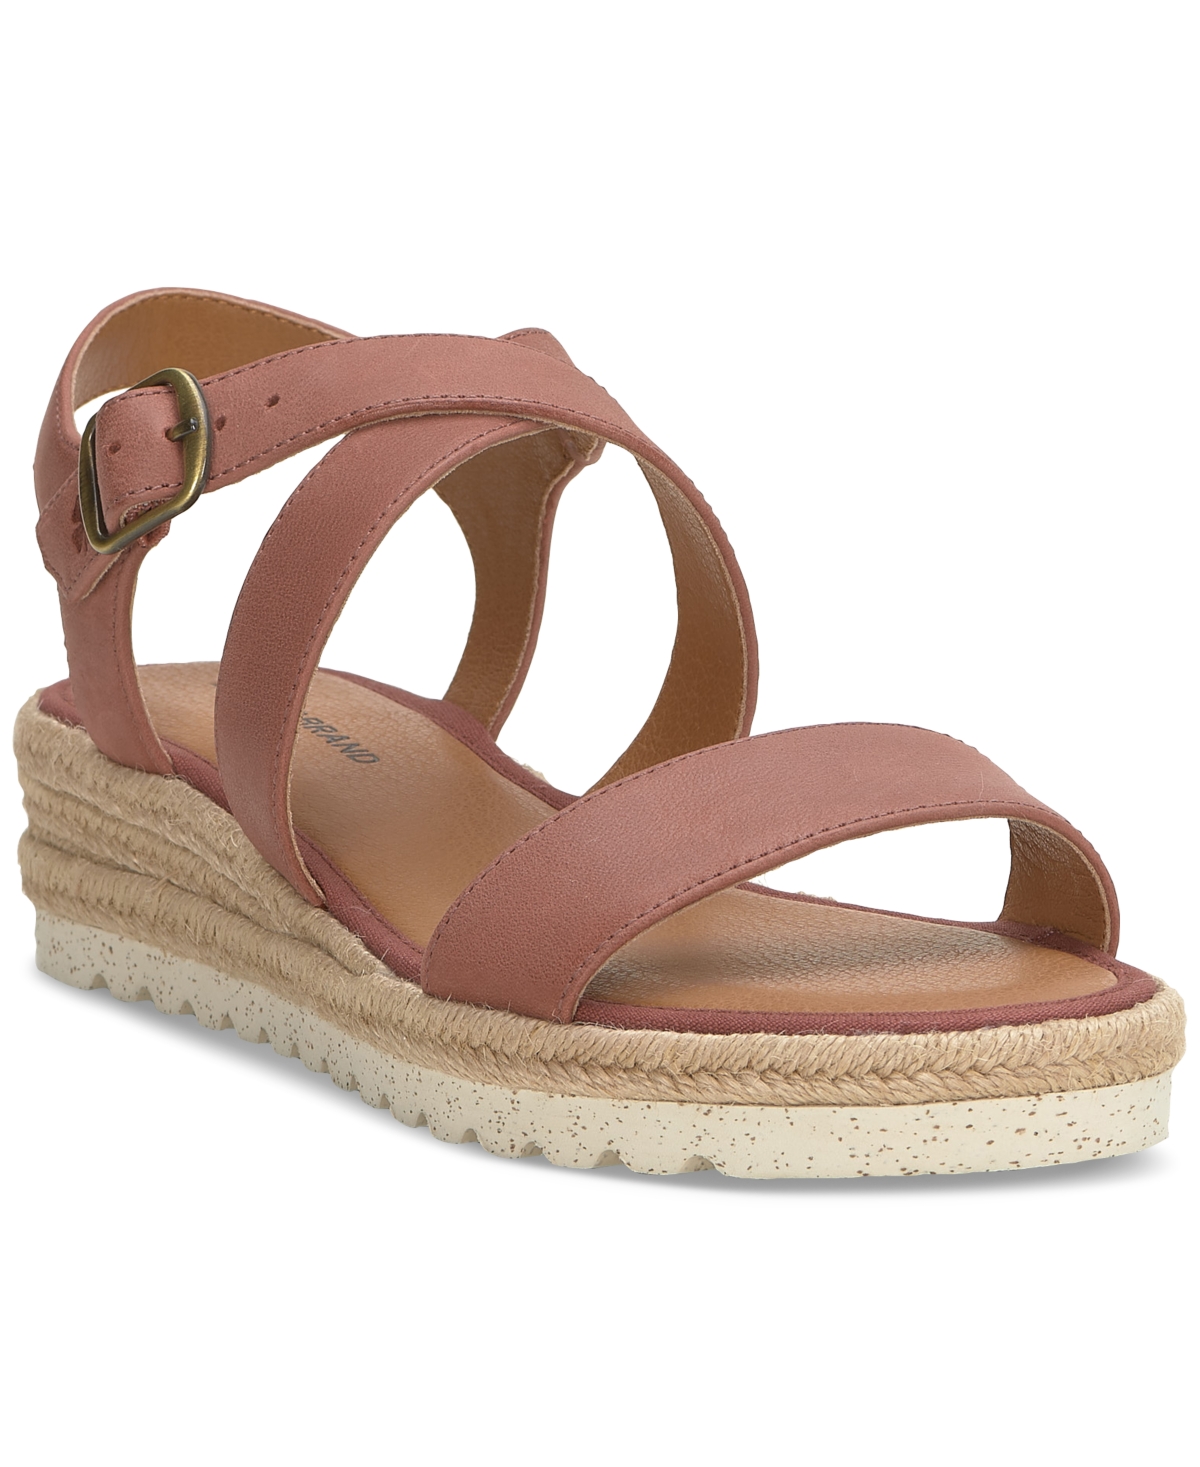 Women's Trianna Strappy Espadrille Wedge Sandals - Rose Red Leather